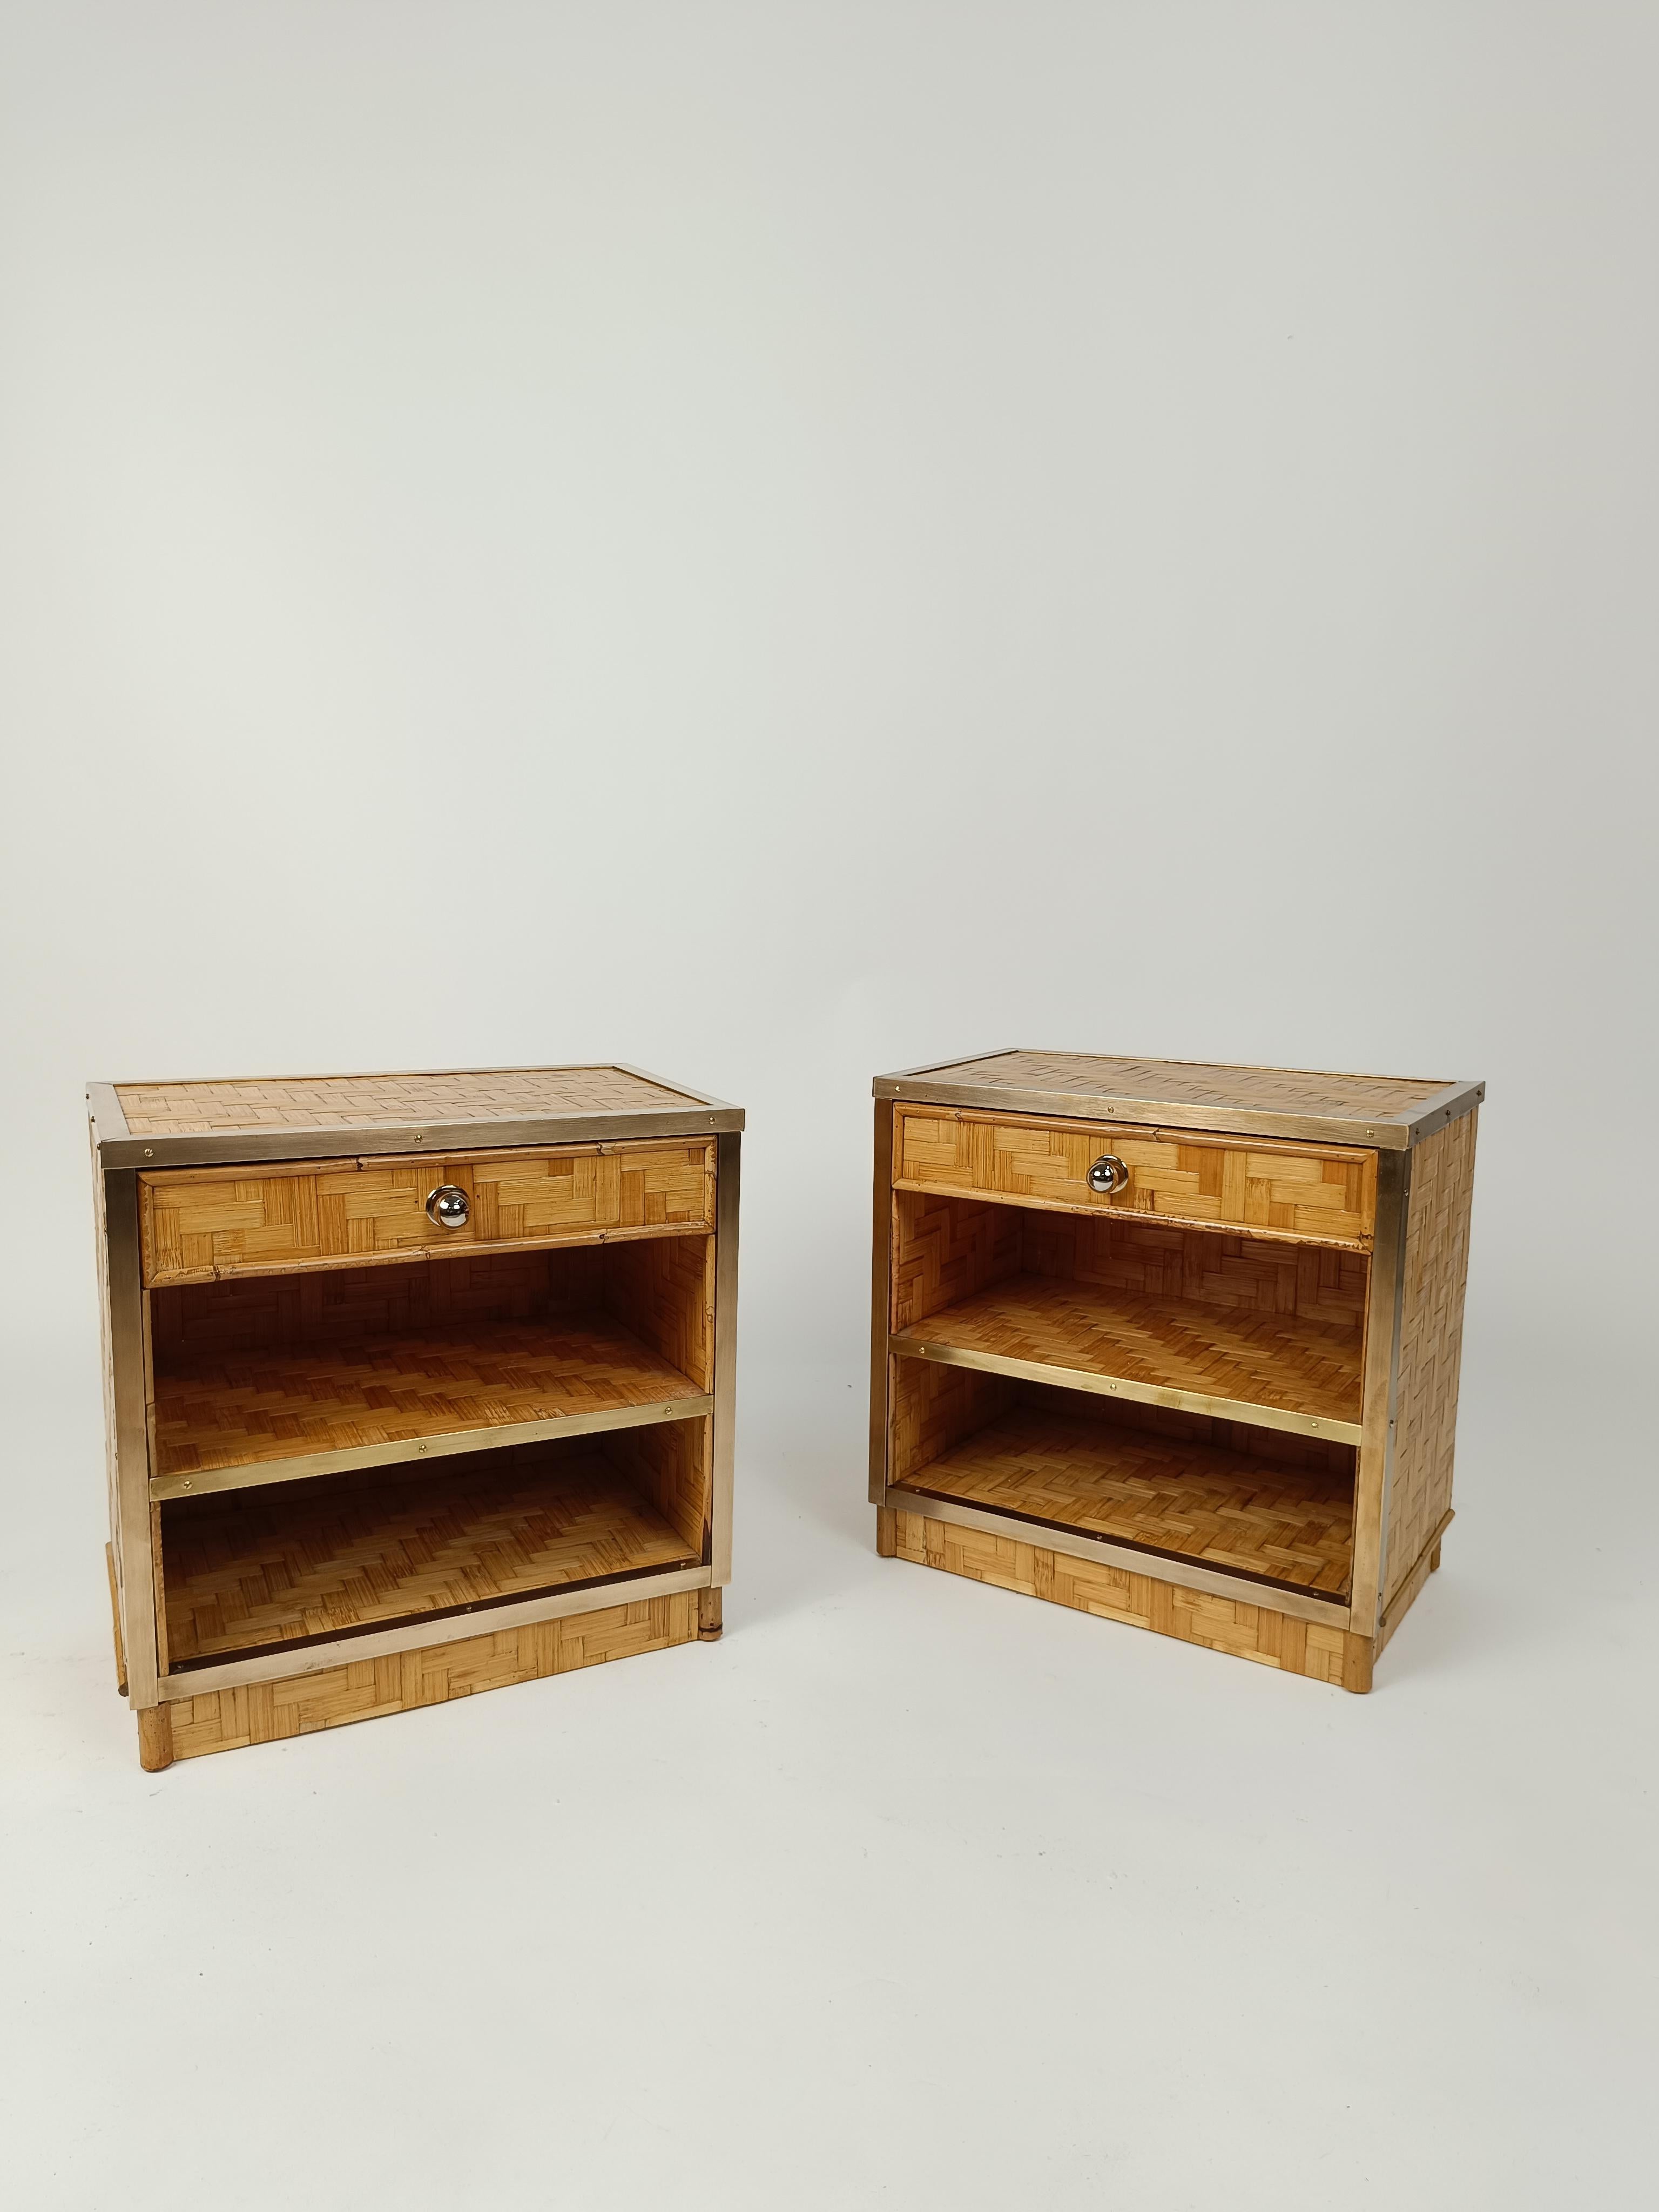 A Pair of midcentury Bedside Table made in Italy between 1960 and 1970.
These Vintage nightstand were made of plywood covered with a dense weave of rattan blocks;
Sections of bamboo sticks and brass details embellish and create glamorous